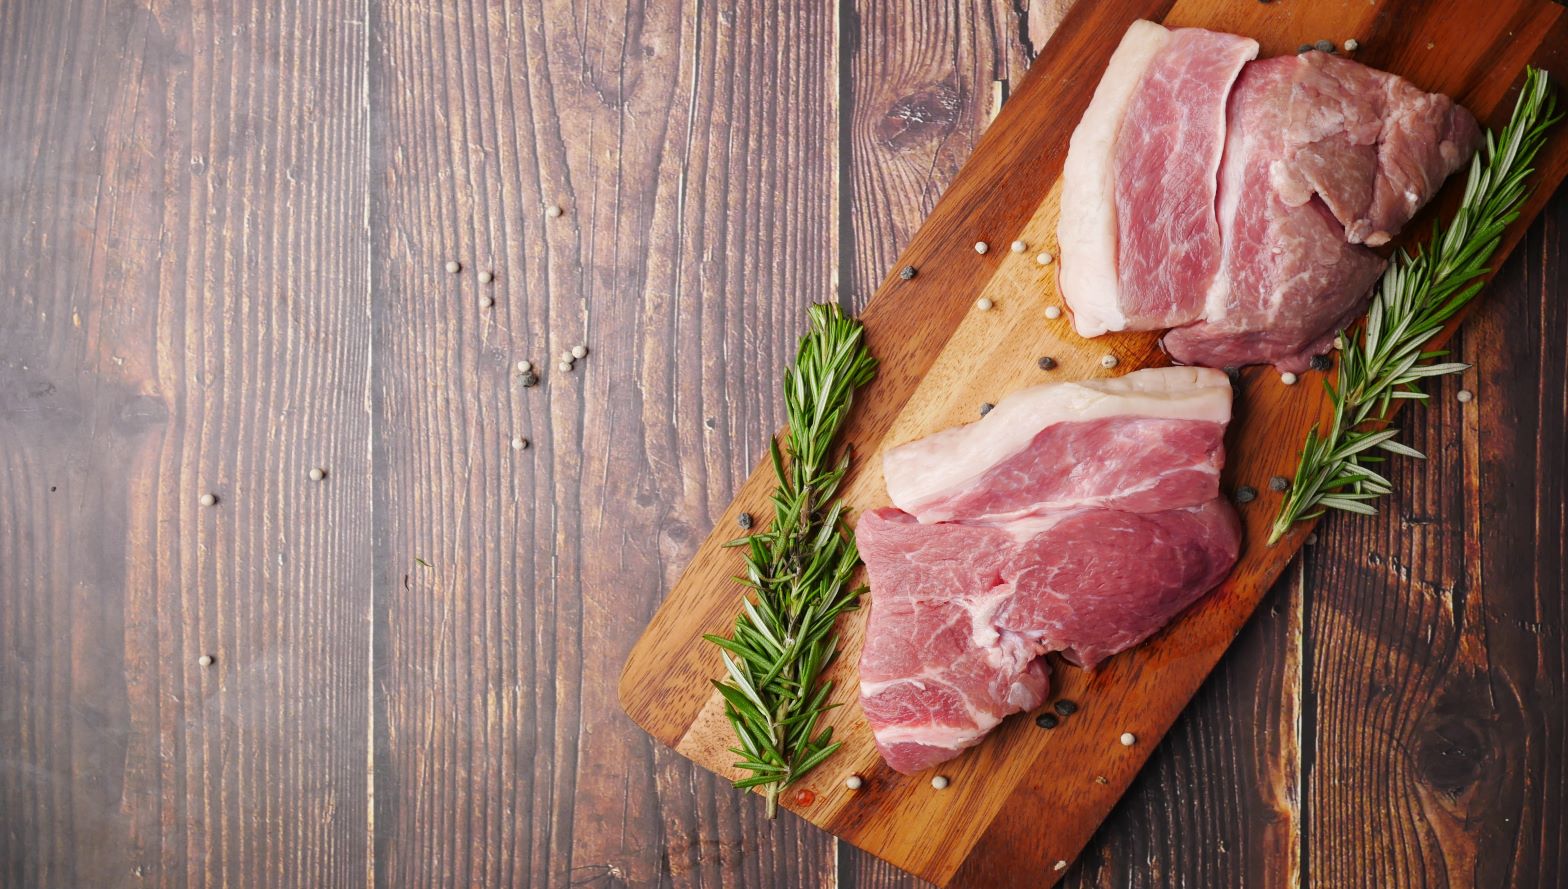 Benefits Of Food Traceability & Fat Analysis In Meat Industry | FPE